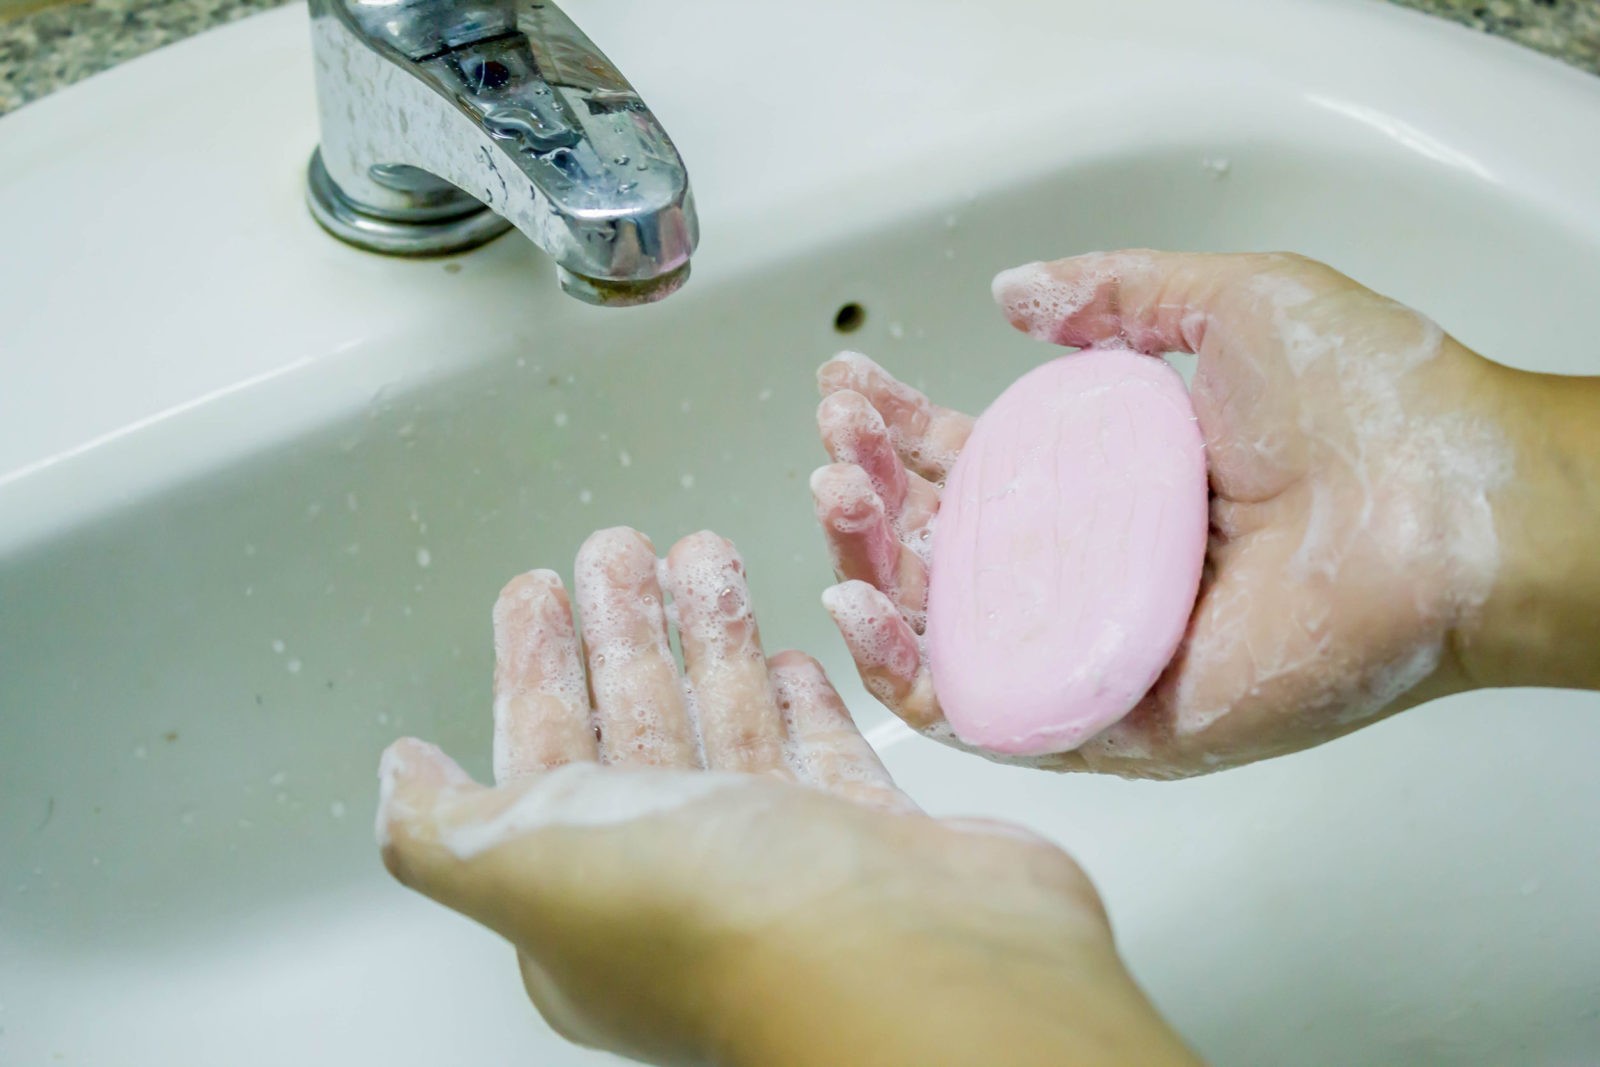 Why I quit using antibacterial soap - Why I Stopped Using Antibacterial Soap by LA cruelty-free beauty blogger My Beauty Bunny